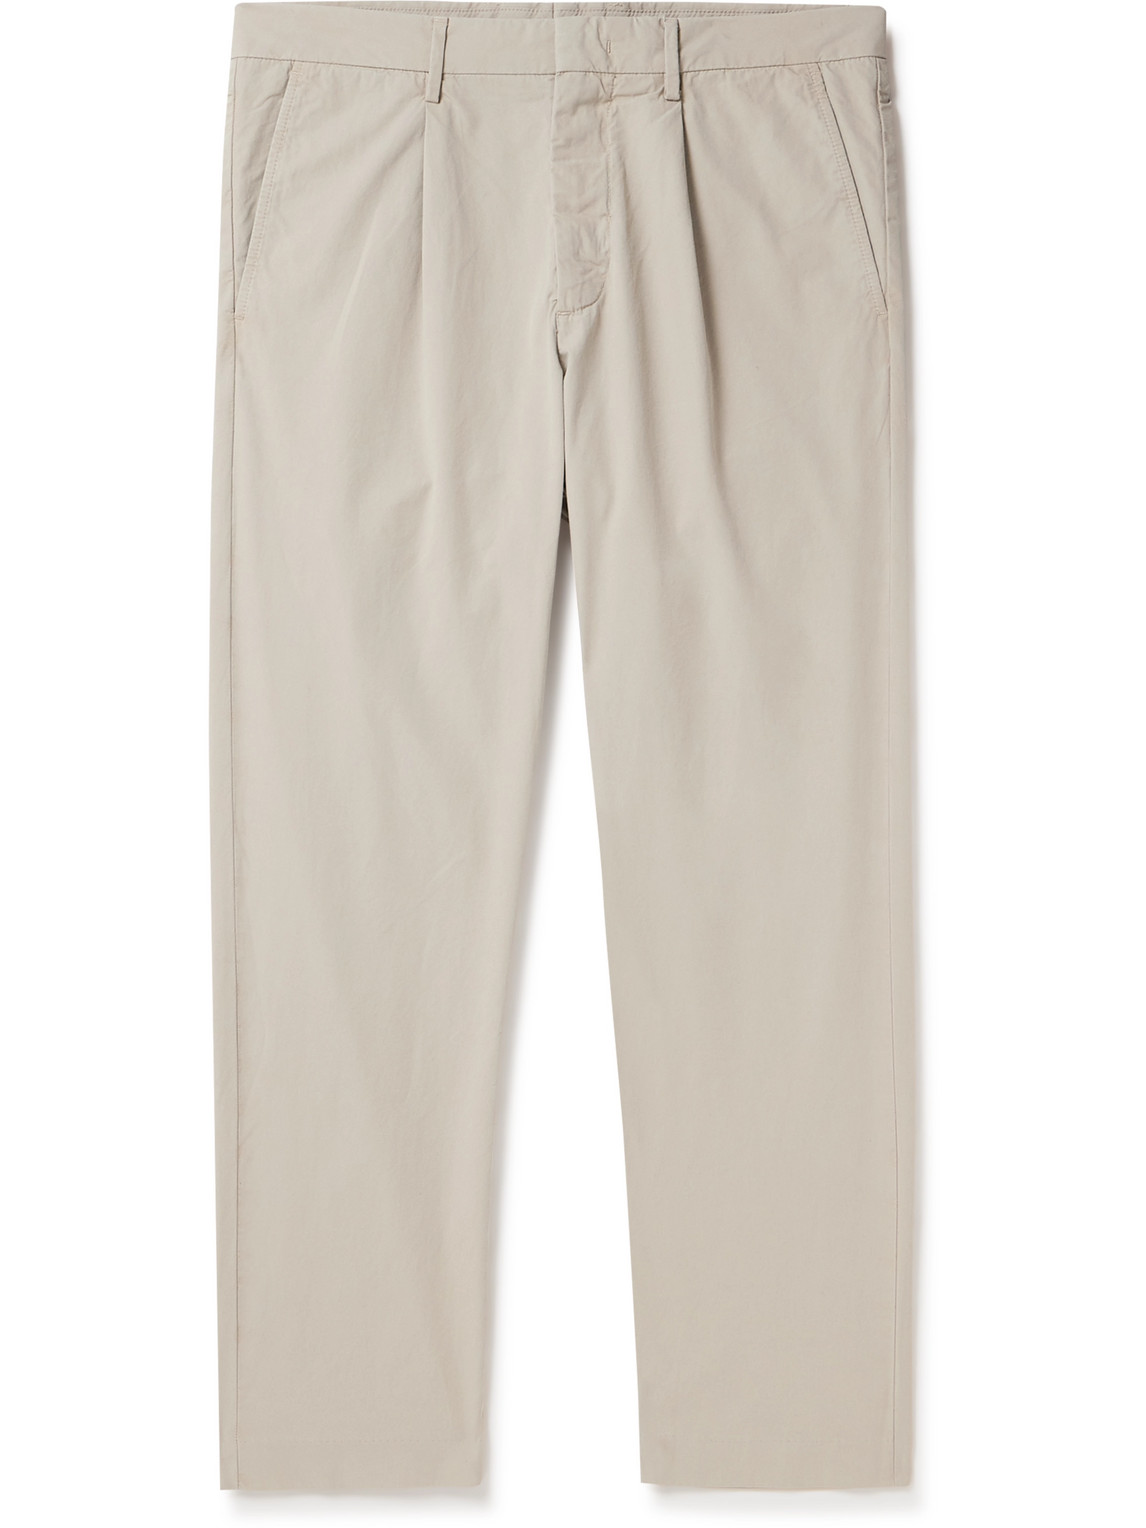 Bill 1080 Tapered Pleated Organic Cotton-Blend Trousers